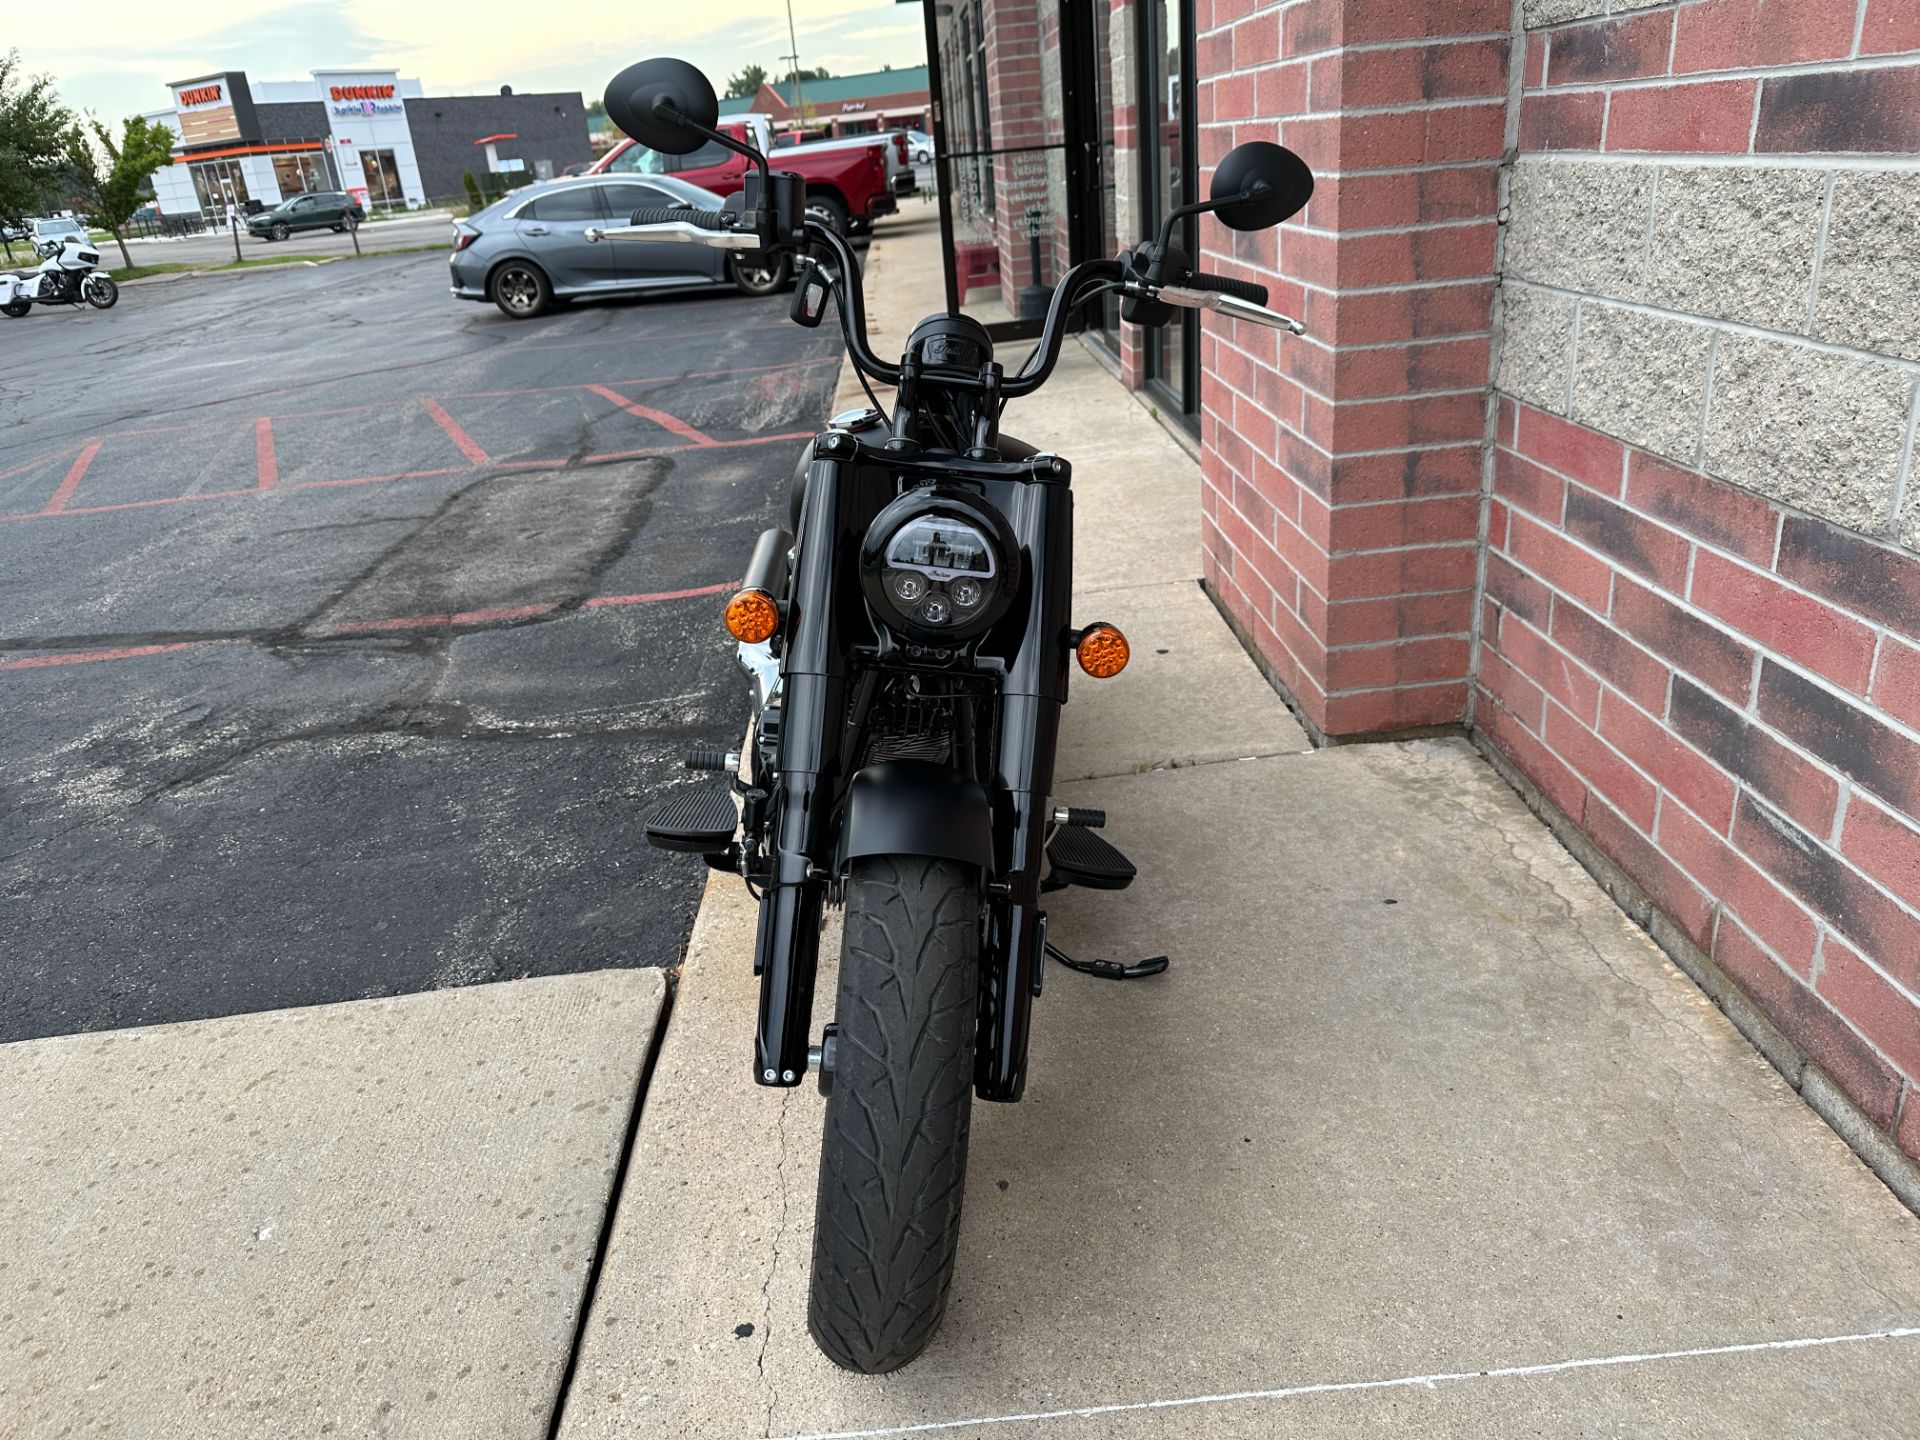 2022 Indian Motorcycle Chief Bobber Dark Horse® in Muskego, Wisconsin - Photo 3